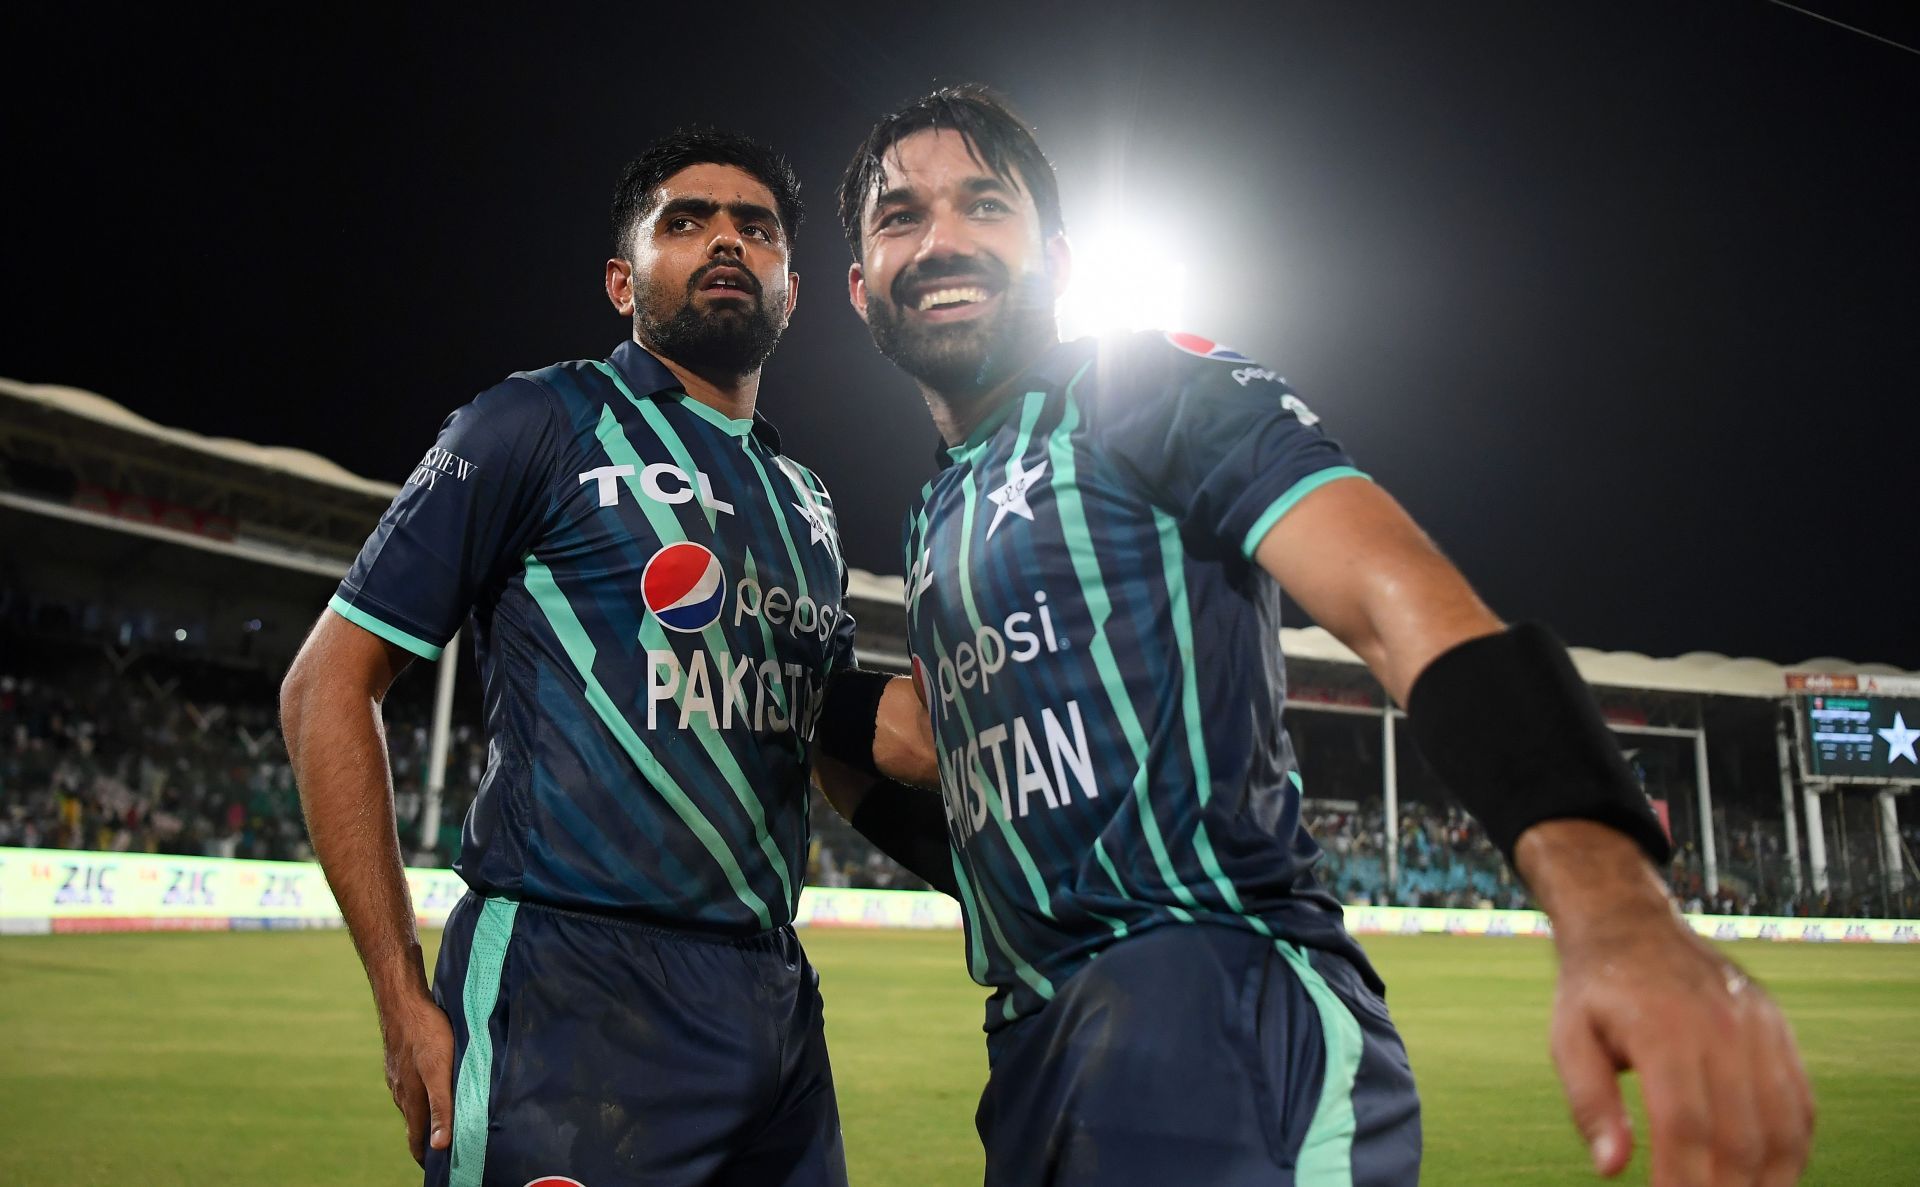 Babar Azam and Mohammad Rizwan sent records tumbling during their unbeaten 203-run stand. (Credits: Getty)